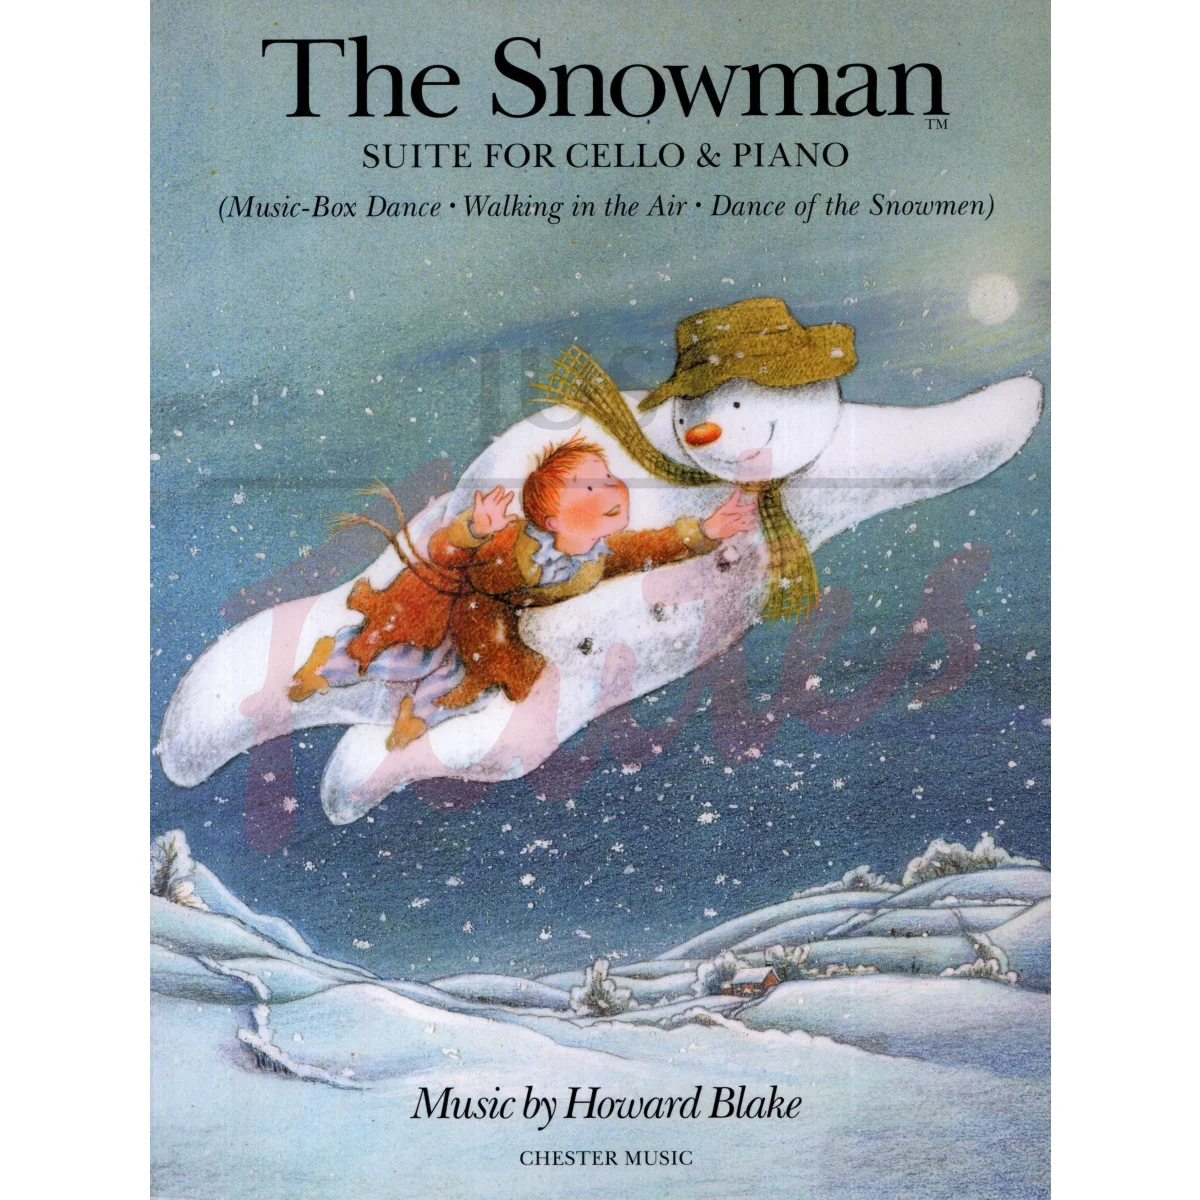 The Snowman Suite for Cello and Piano